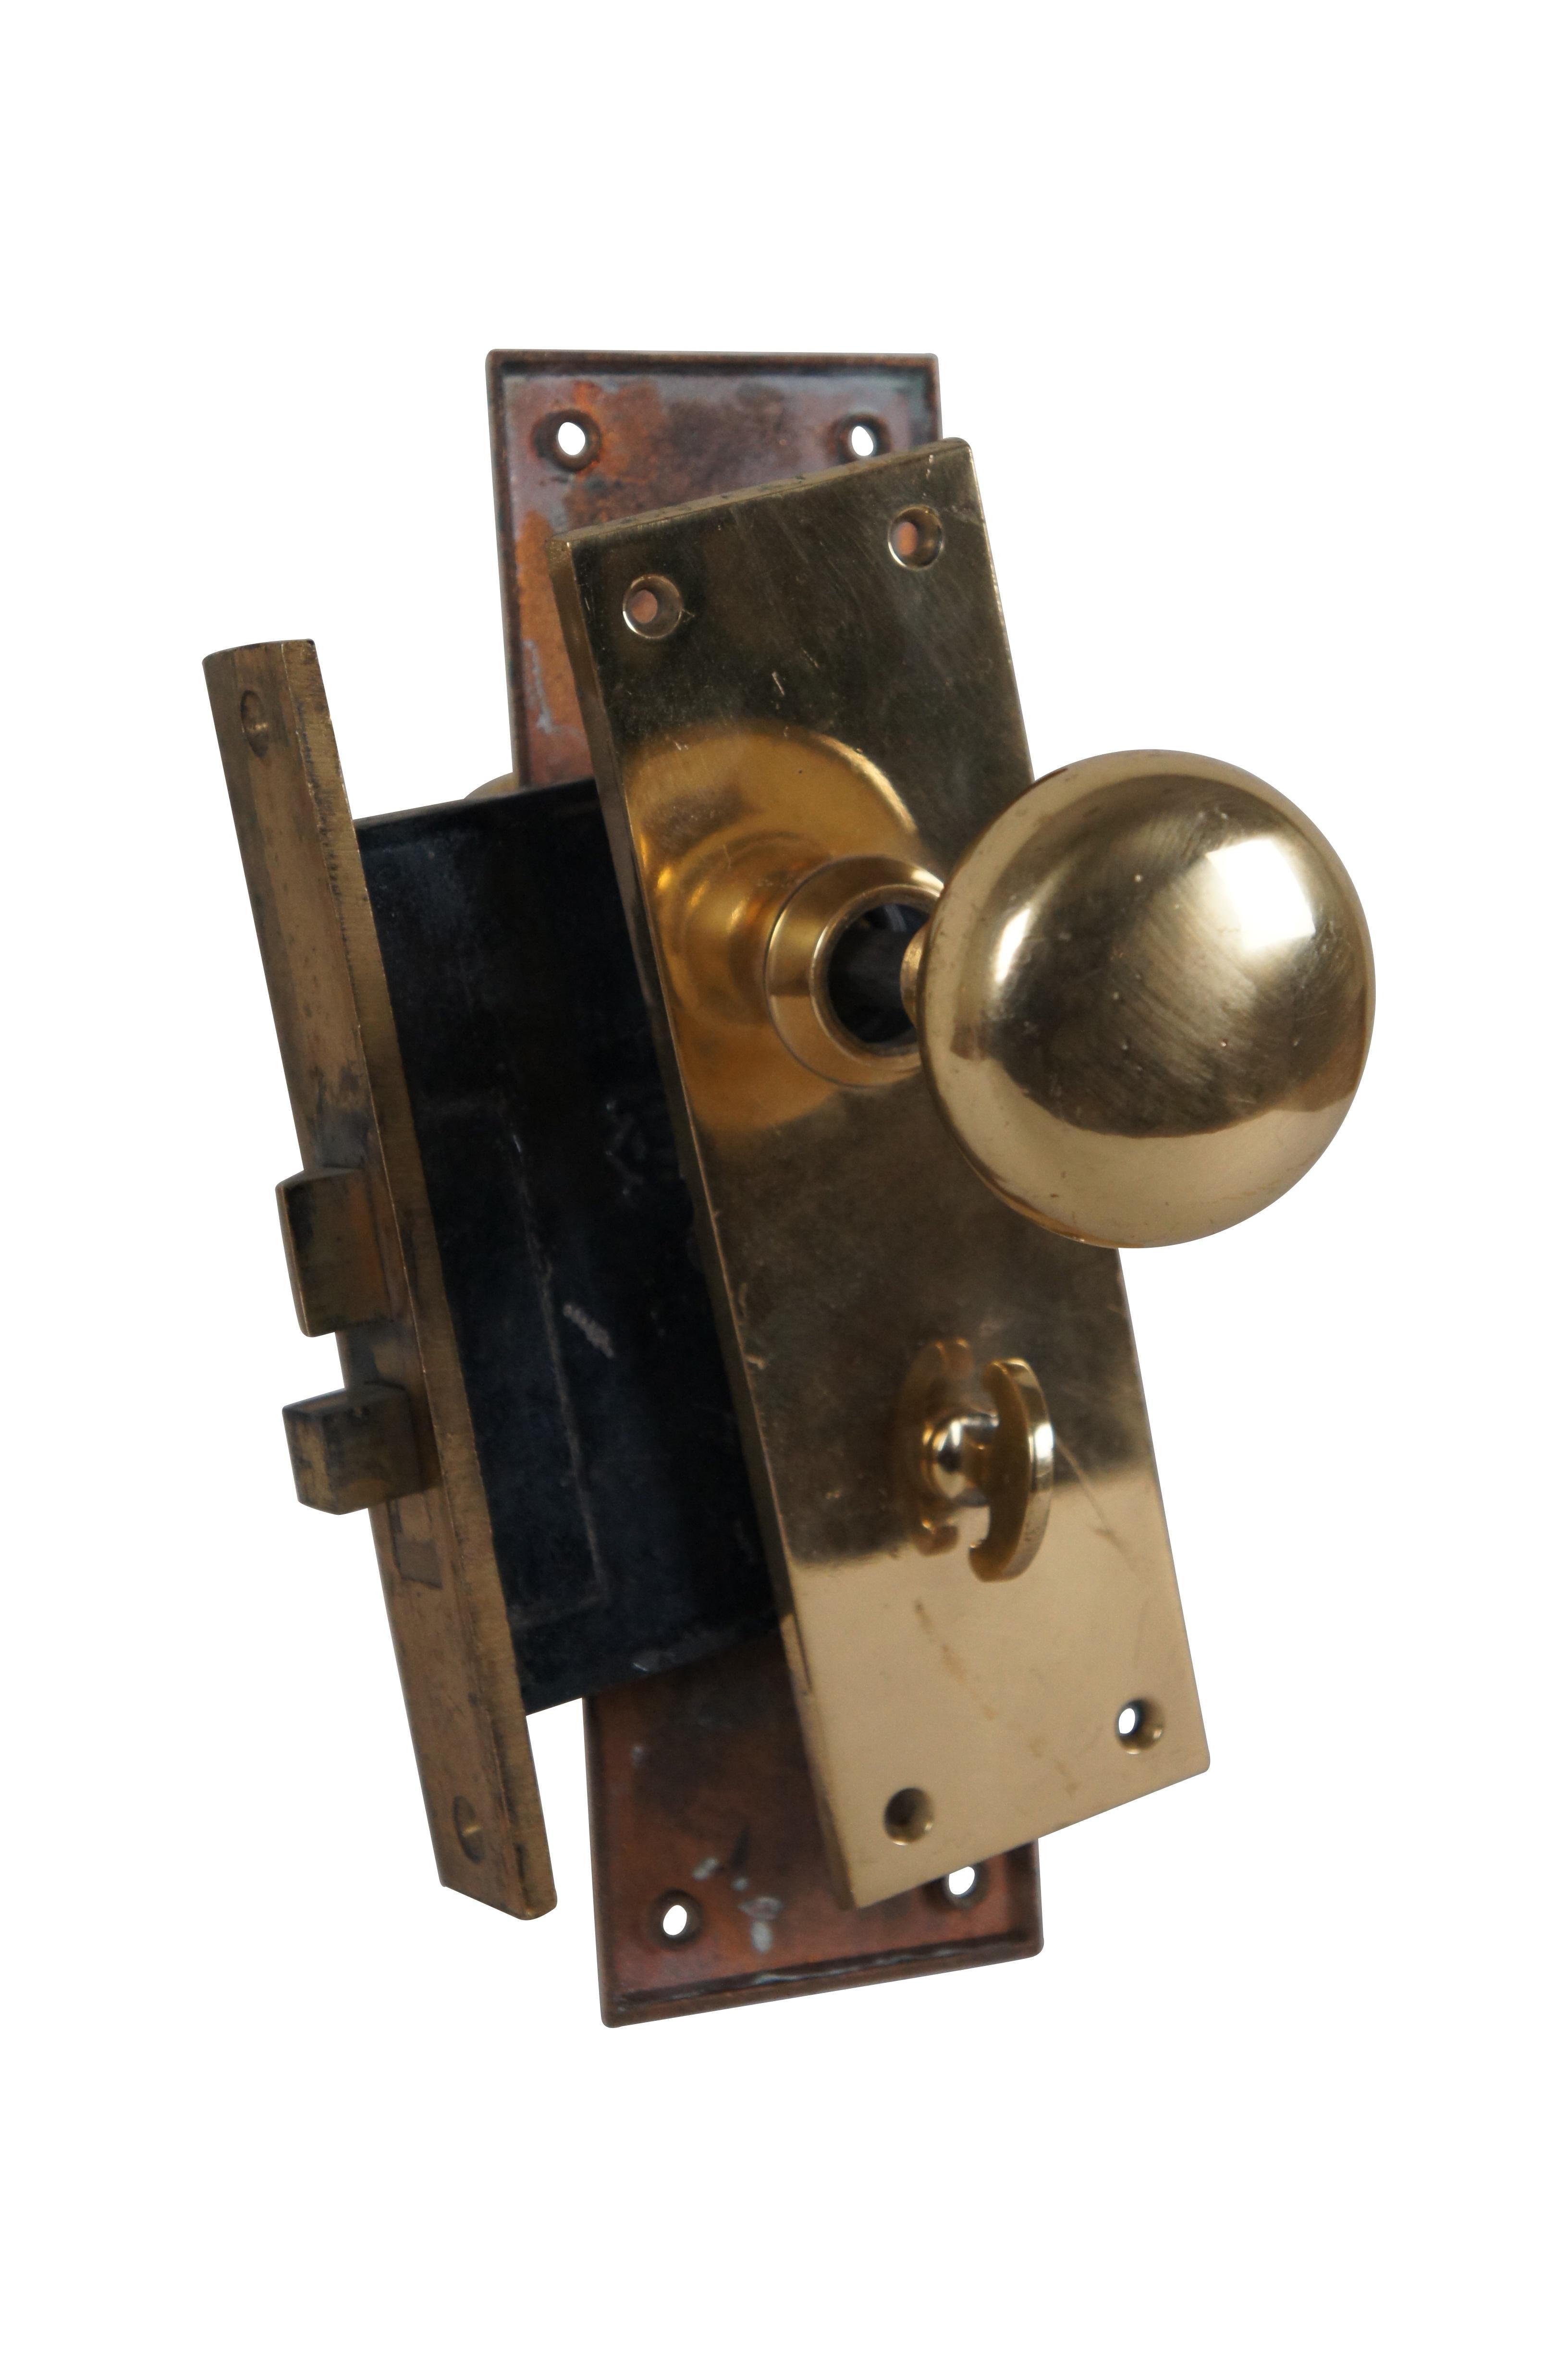 Late 19th - early 20th century reclaimed entry door lockset featuring heavy brass plates, round knobs, and an un-keyed manual dead bolt type latch, only accessible from one side of the door. Knob and latch mechanisms in functional condition.